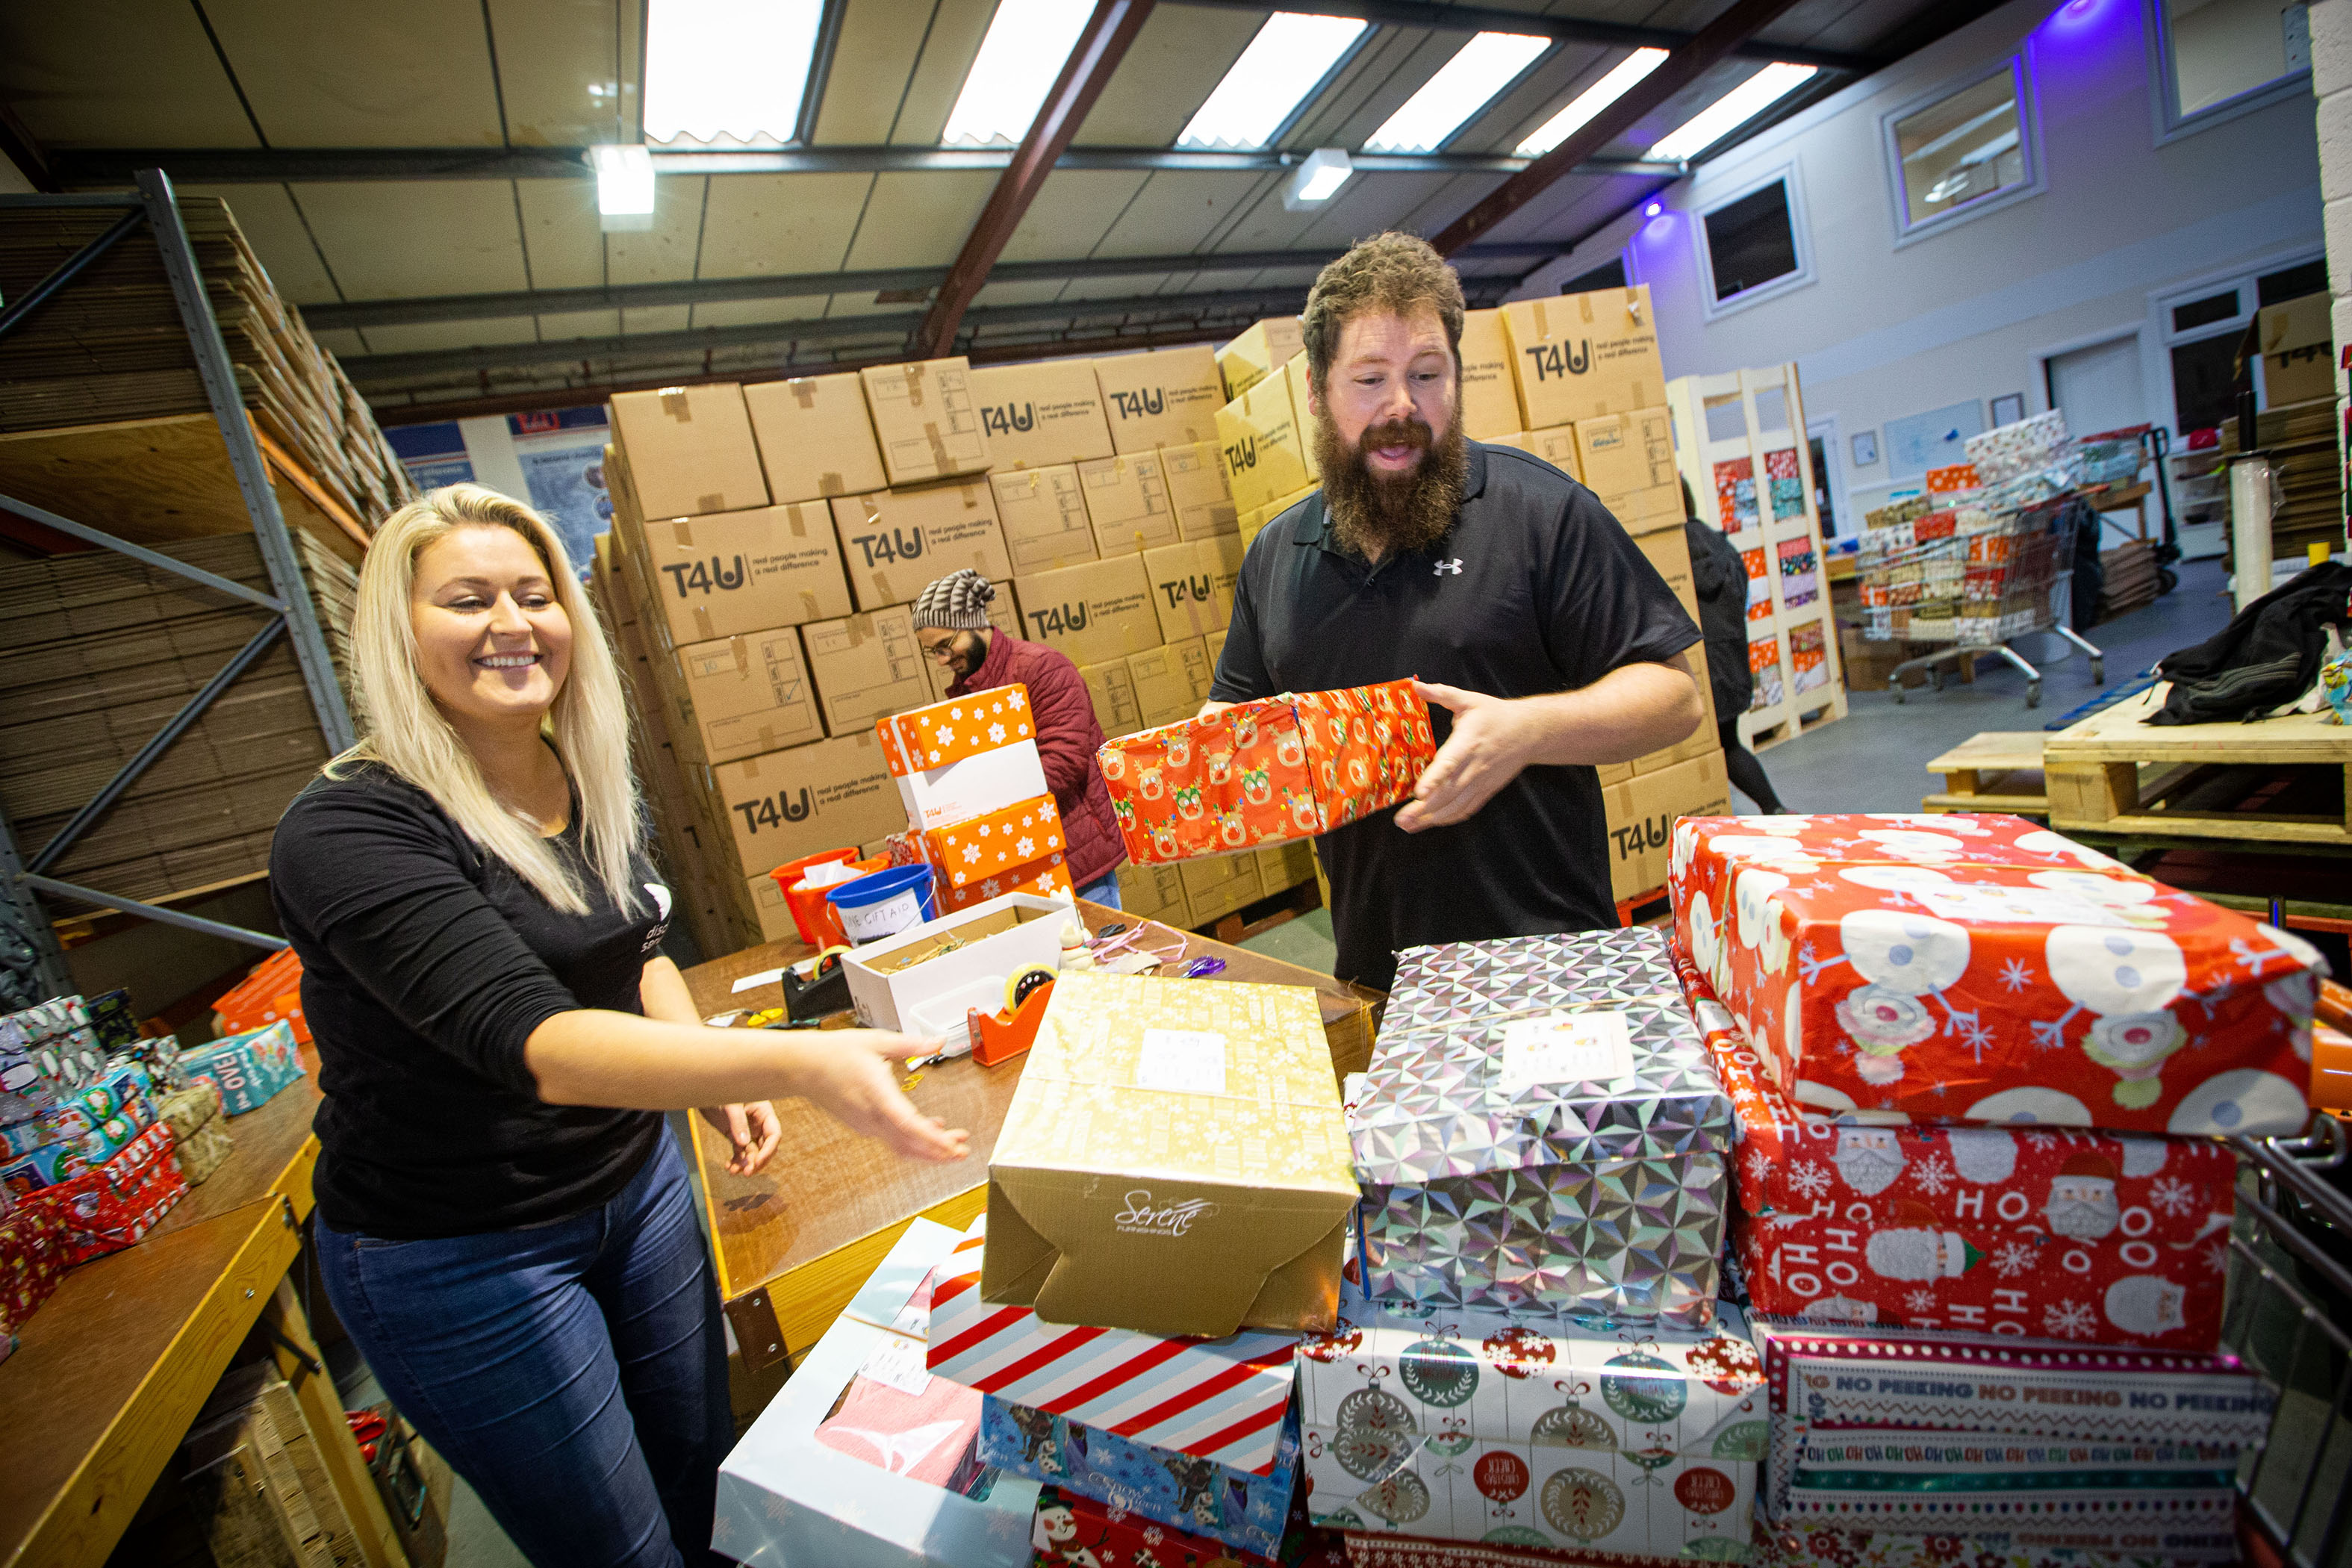 Kind-hearted team pack shoeboxes with Christmas joy